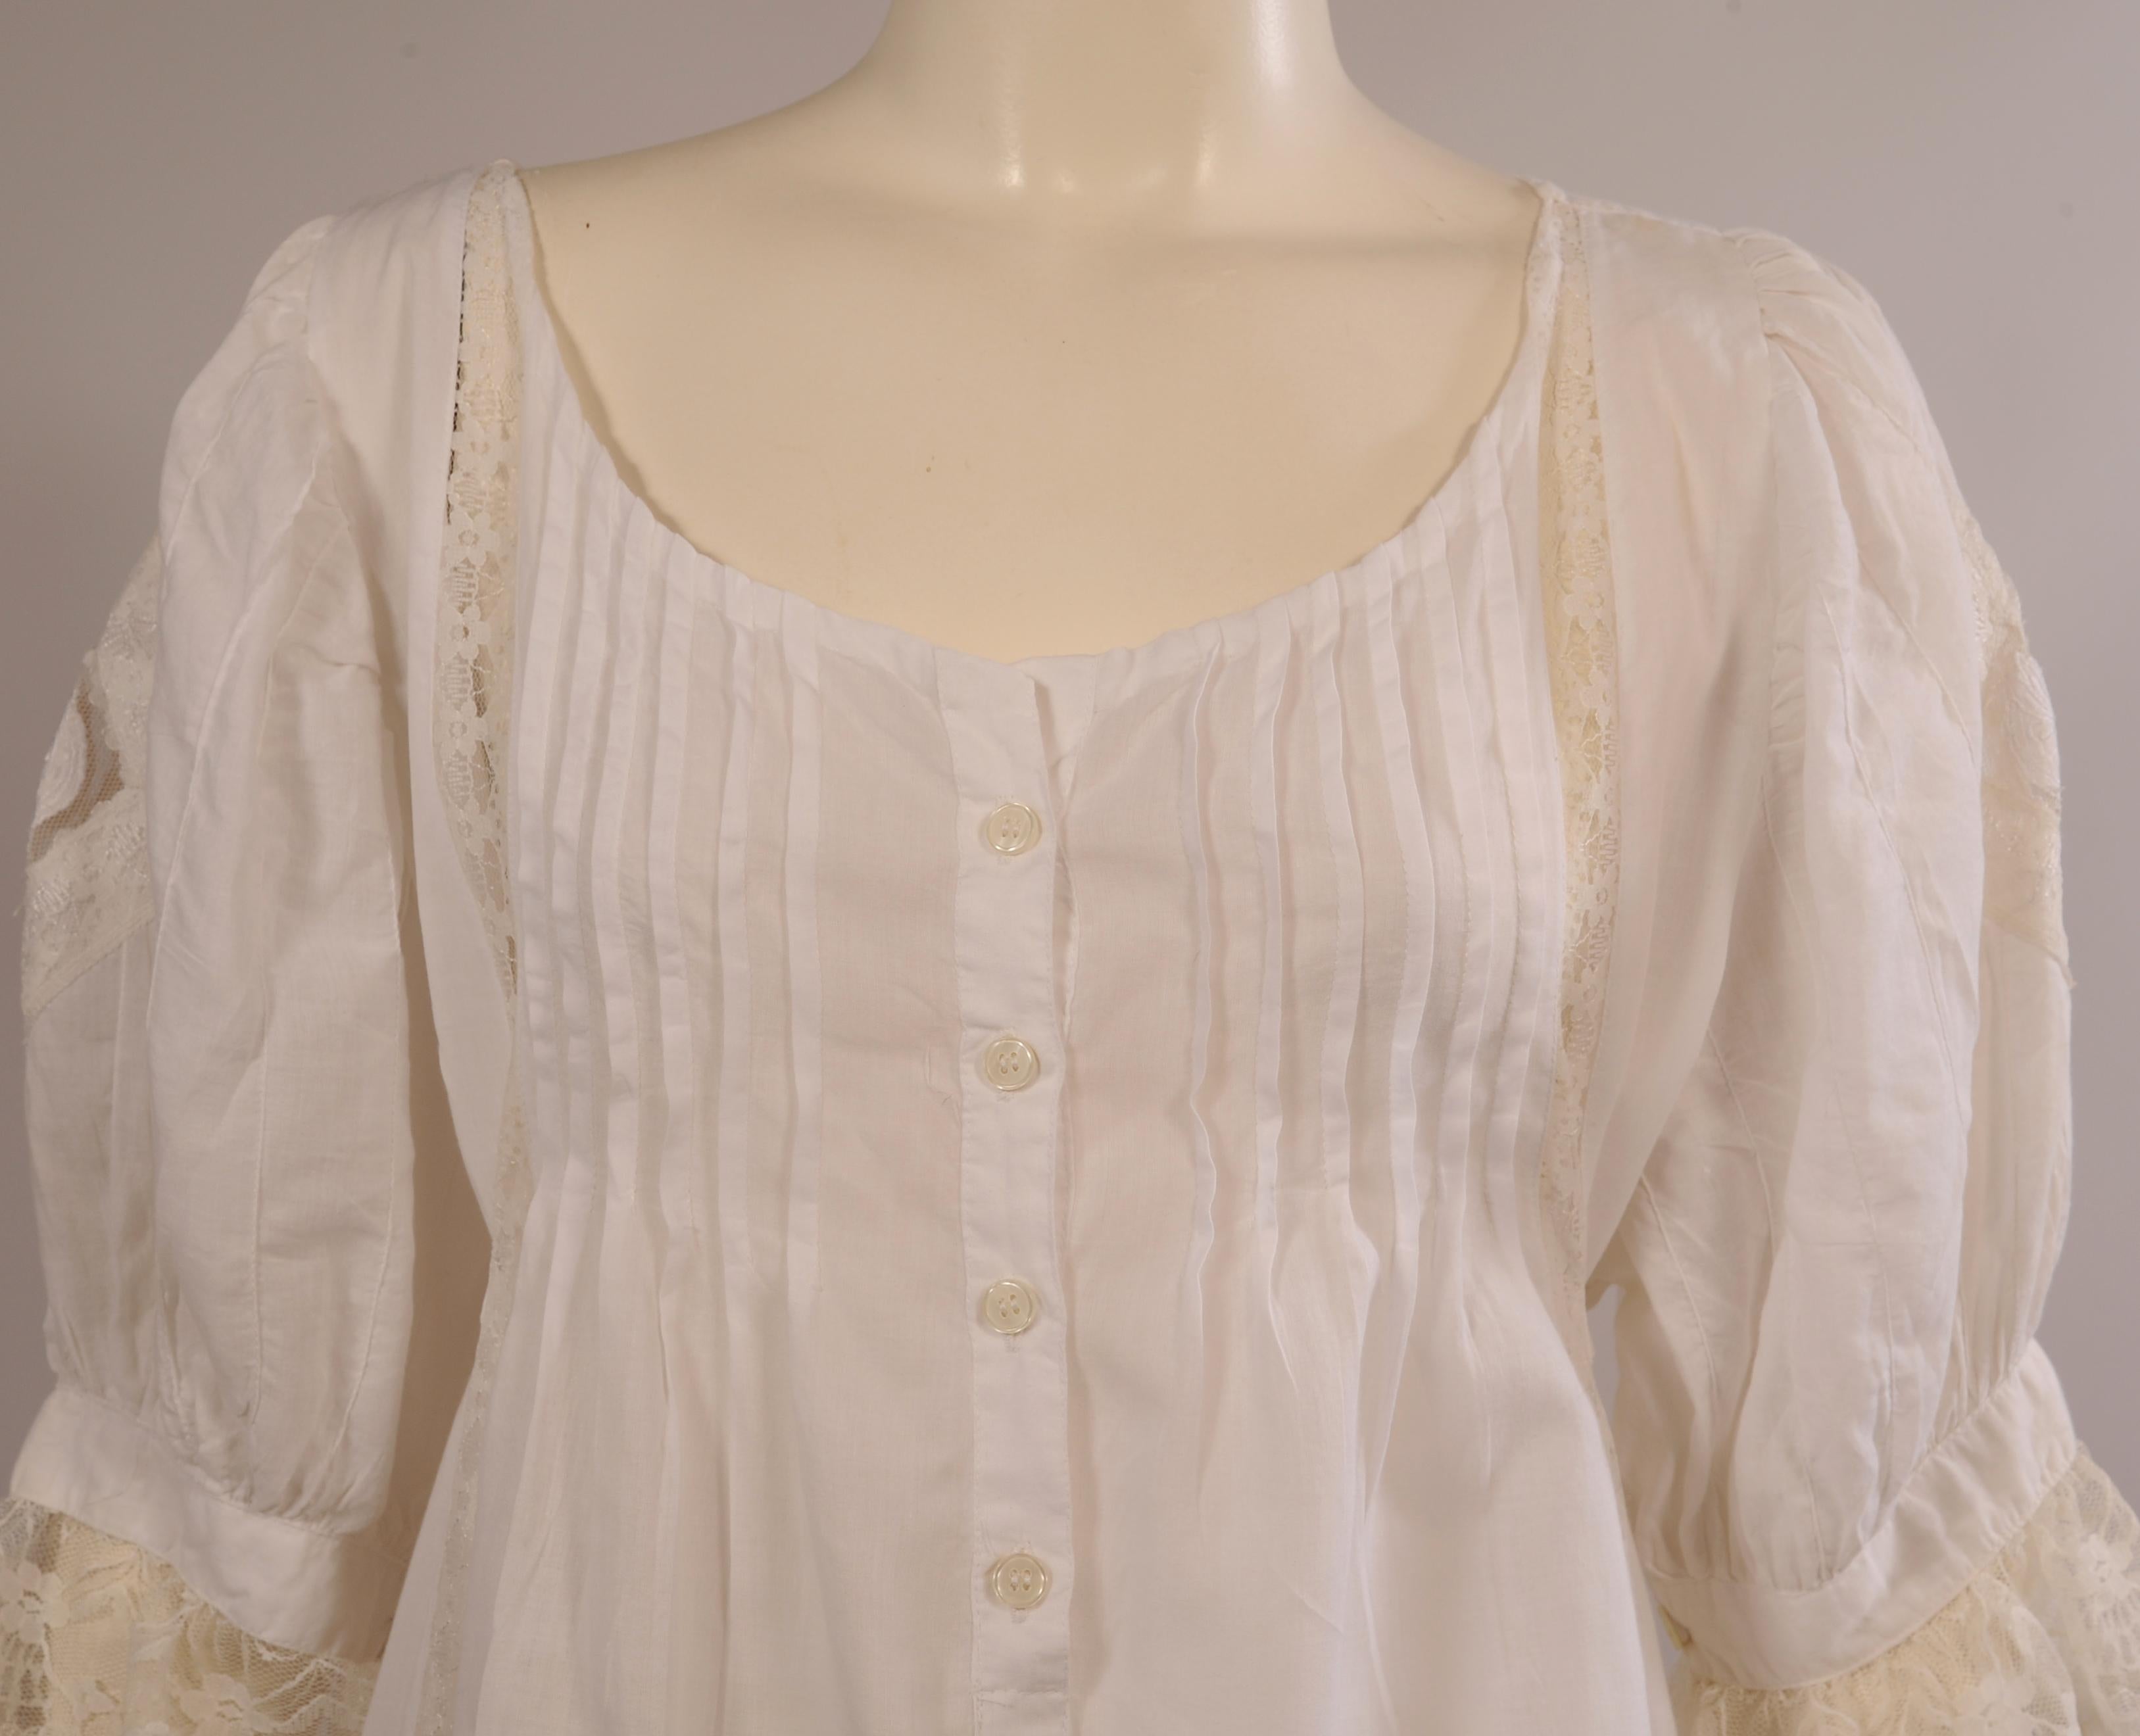 Women's Victorian Inspired White Cotton and Lace Dress circa 1980 For Sale